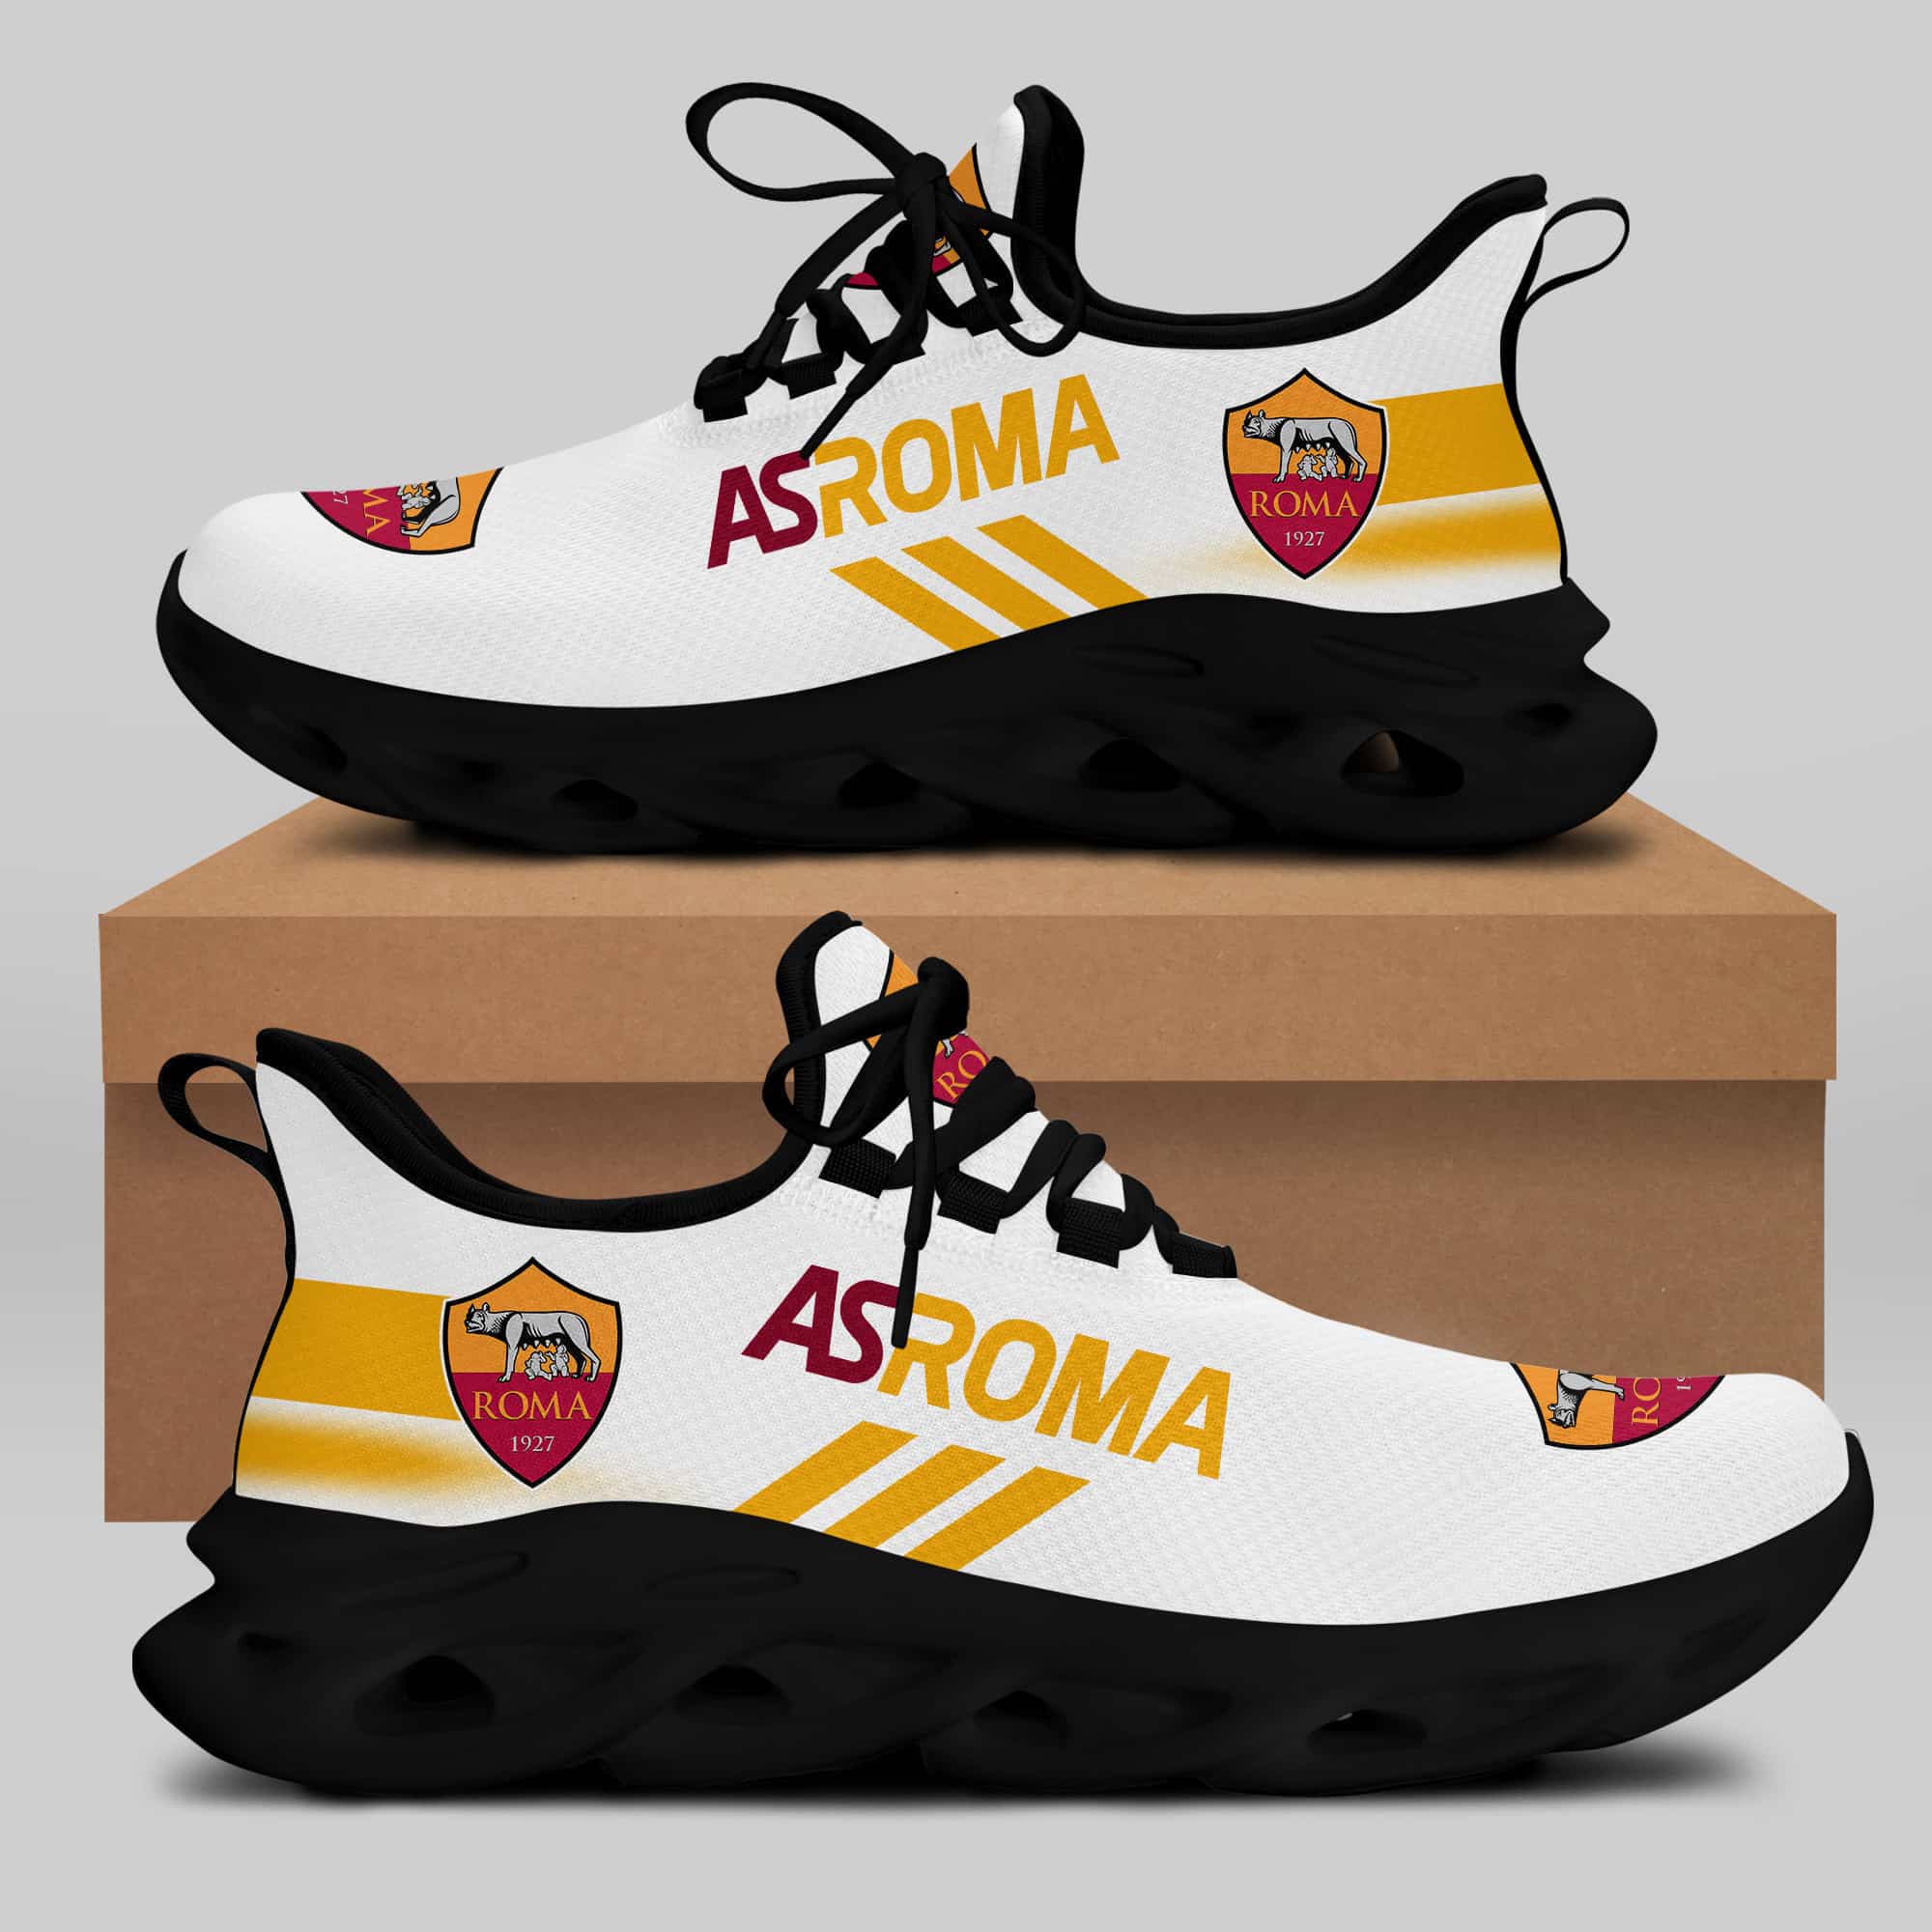 As Roma Running Shoes Max Soul Shoes Sneakers Ver 27 2